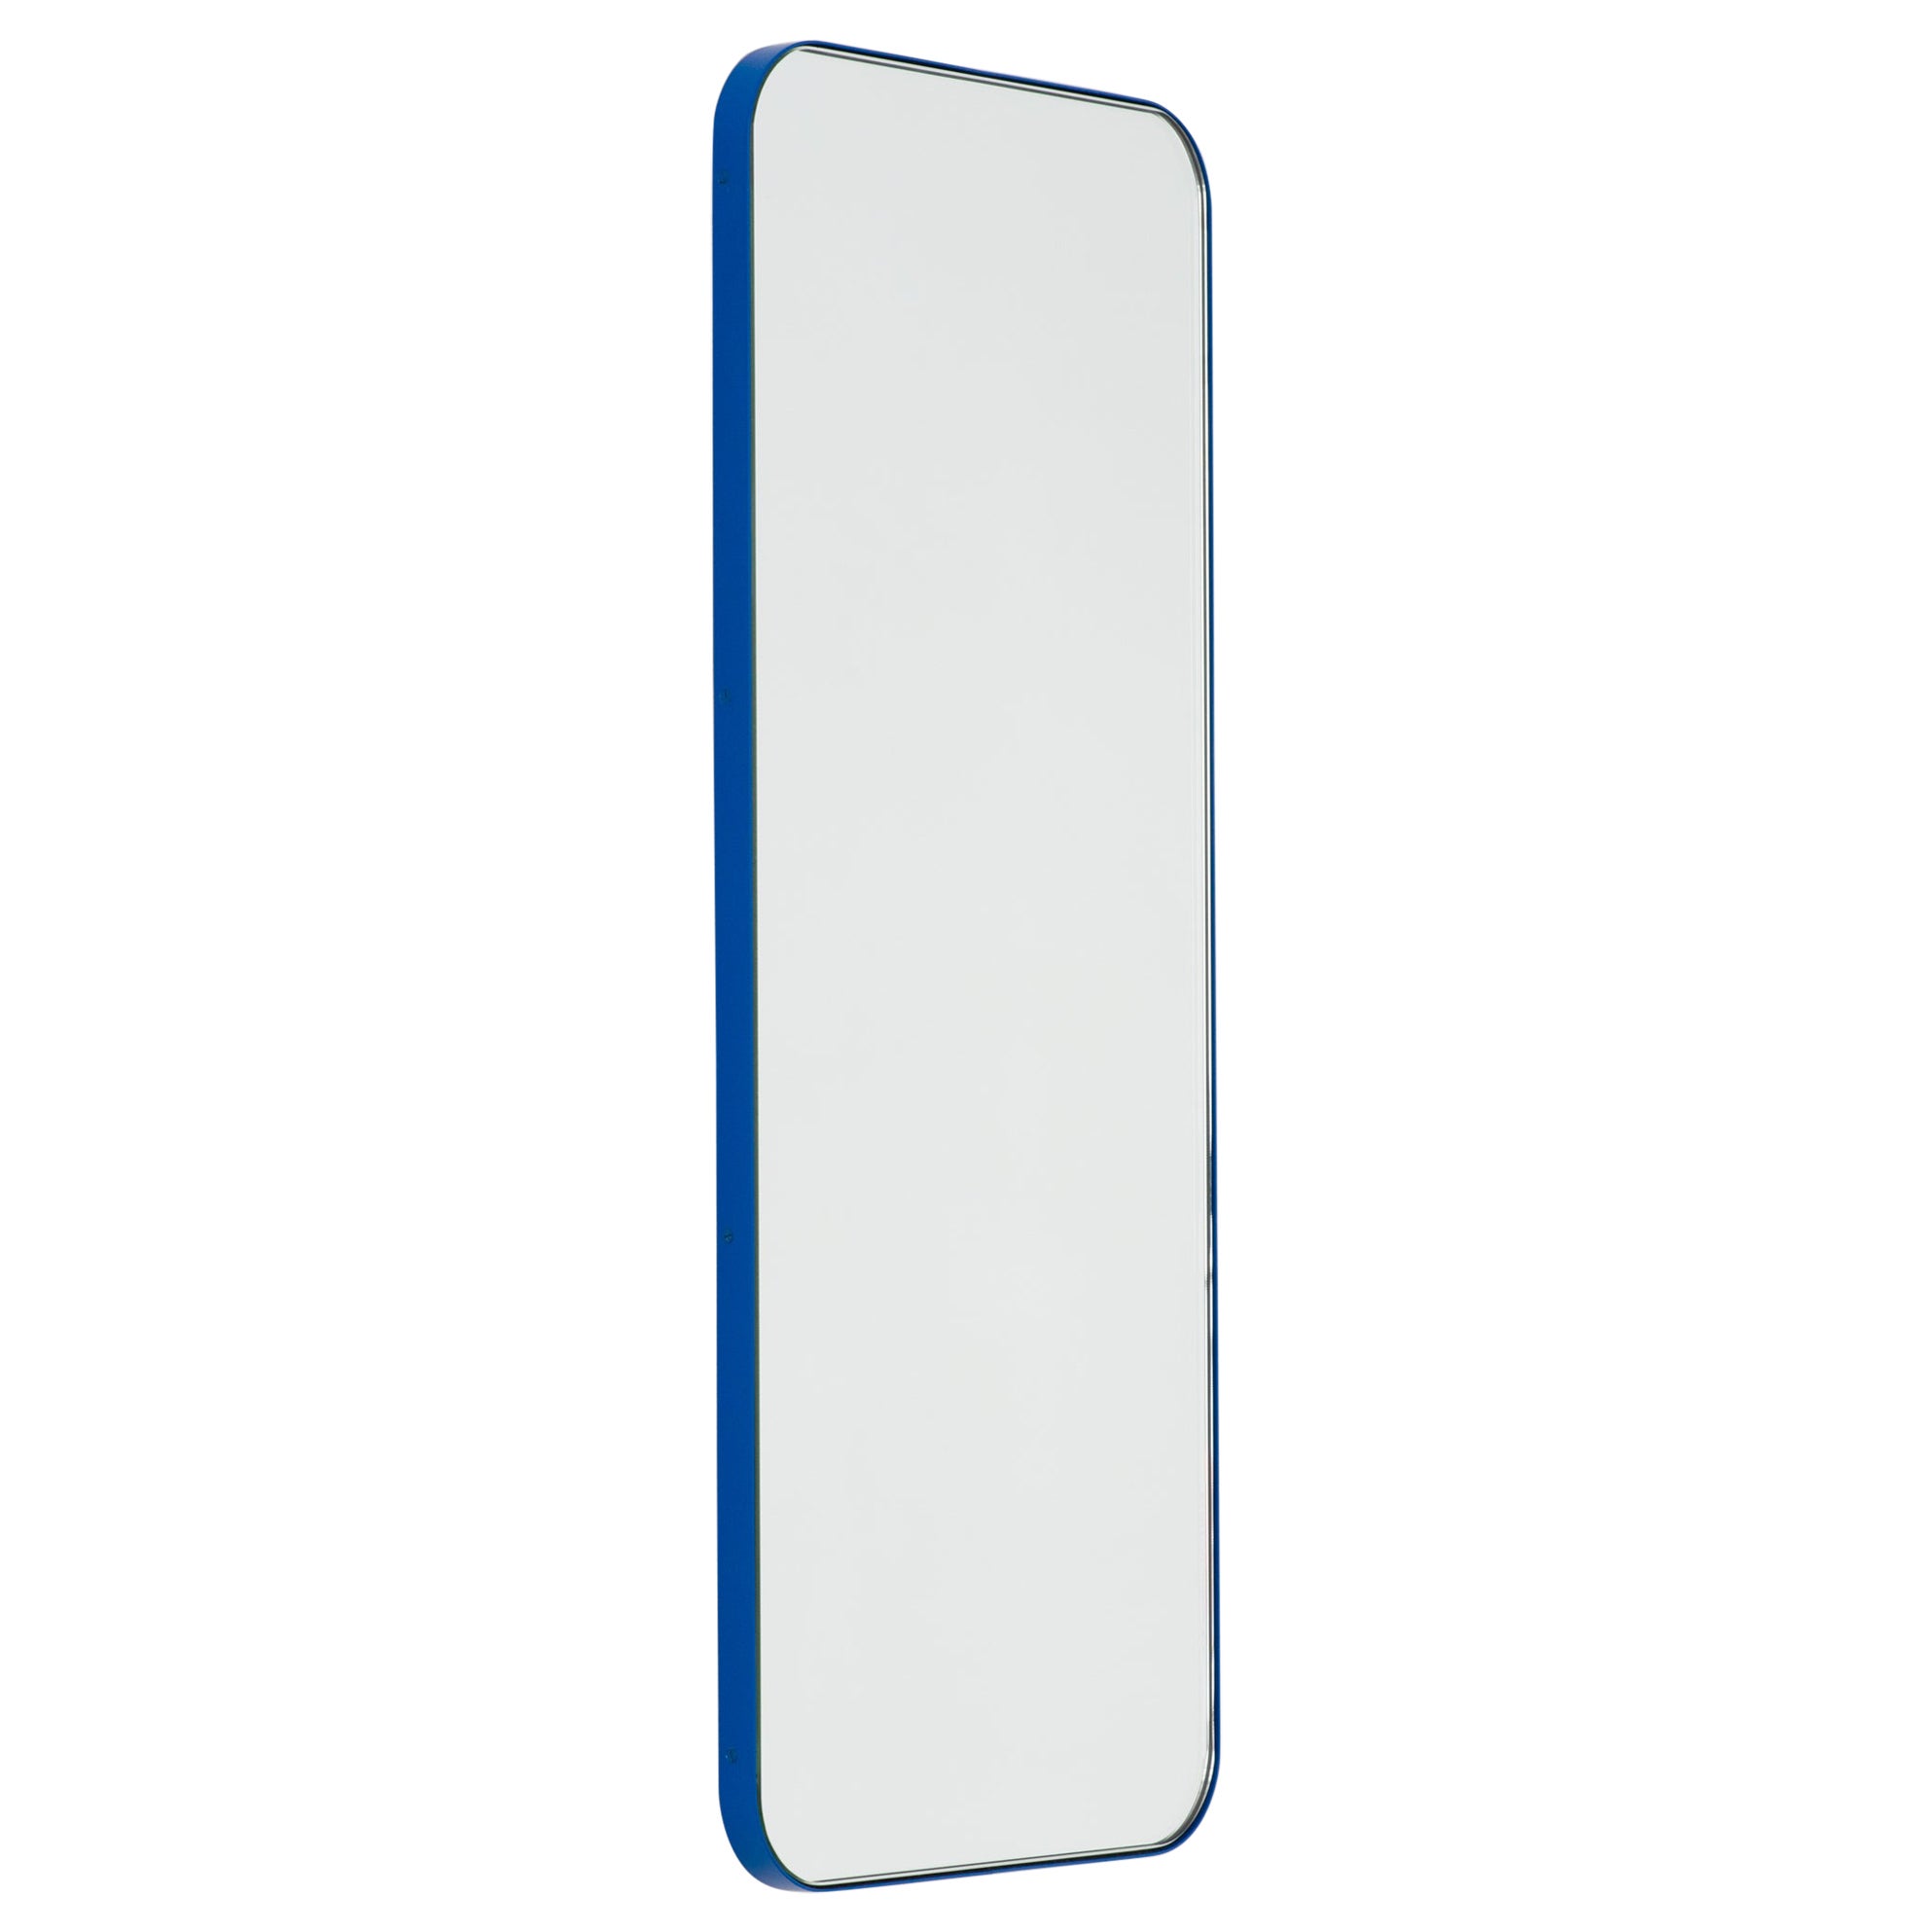 Quadris Rectangular Minimalist Mirror with a Blue Frame, Large For Sale